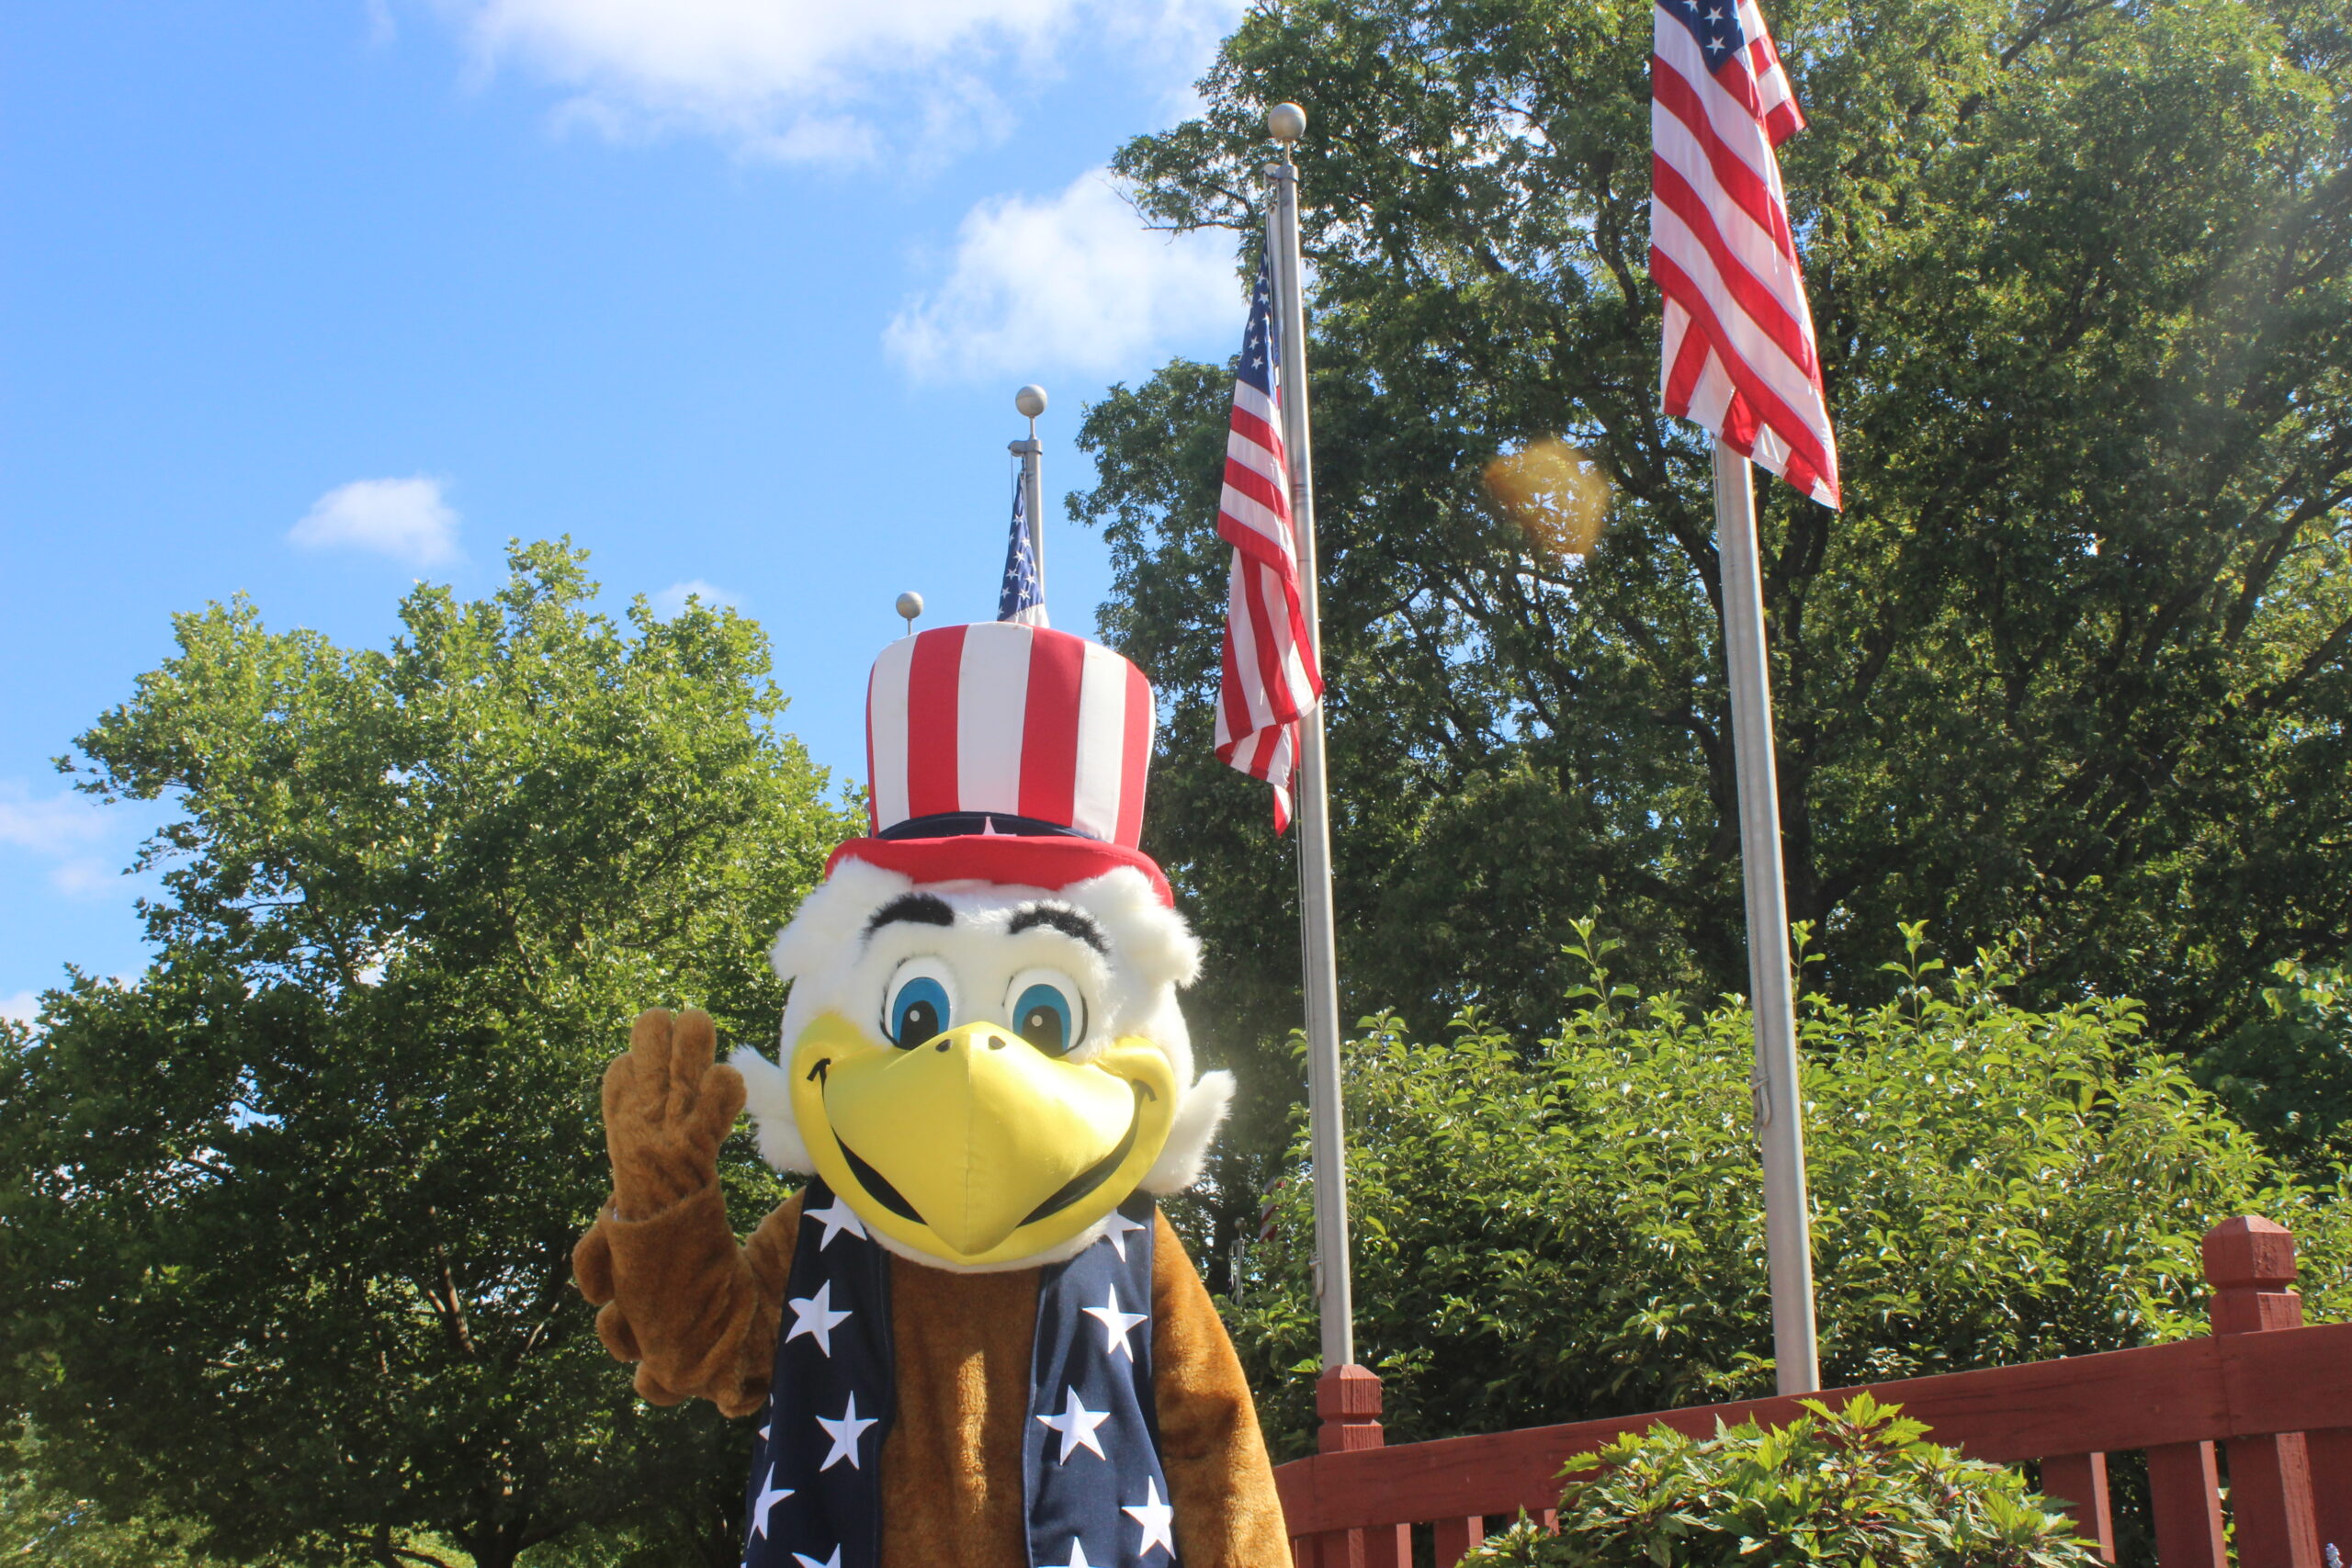 George The Eagle standing next to American Flags in the Fourth of July Section